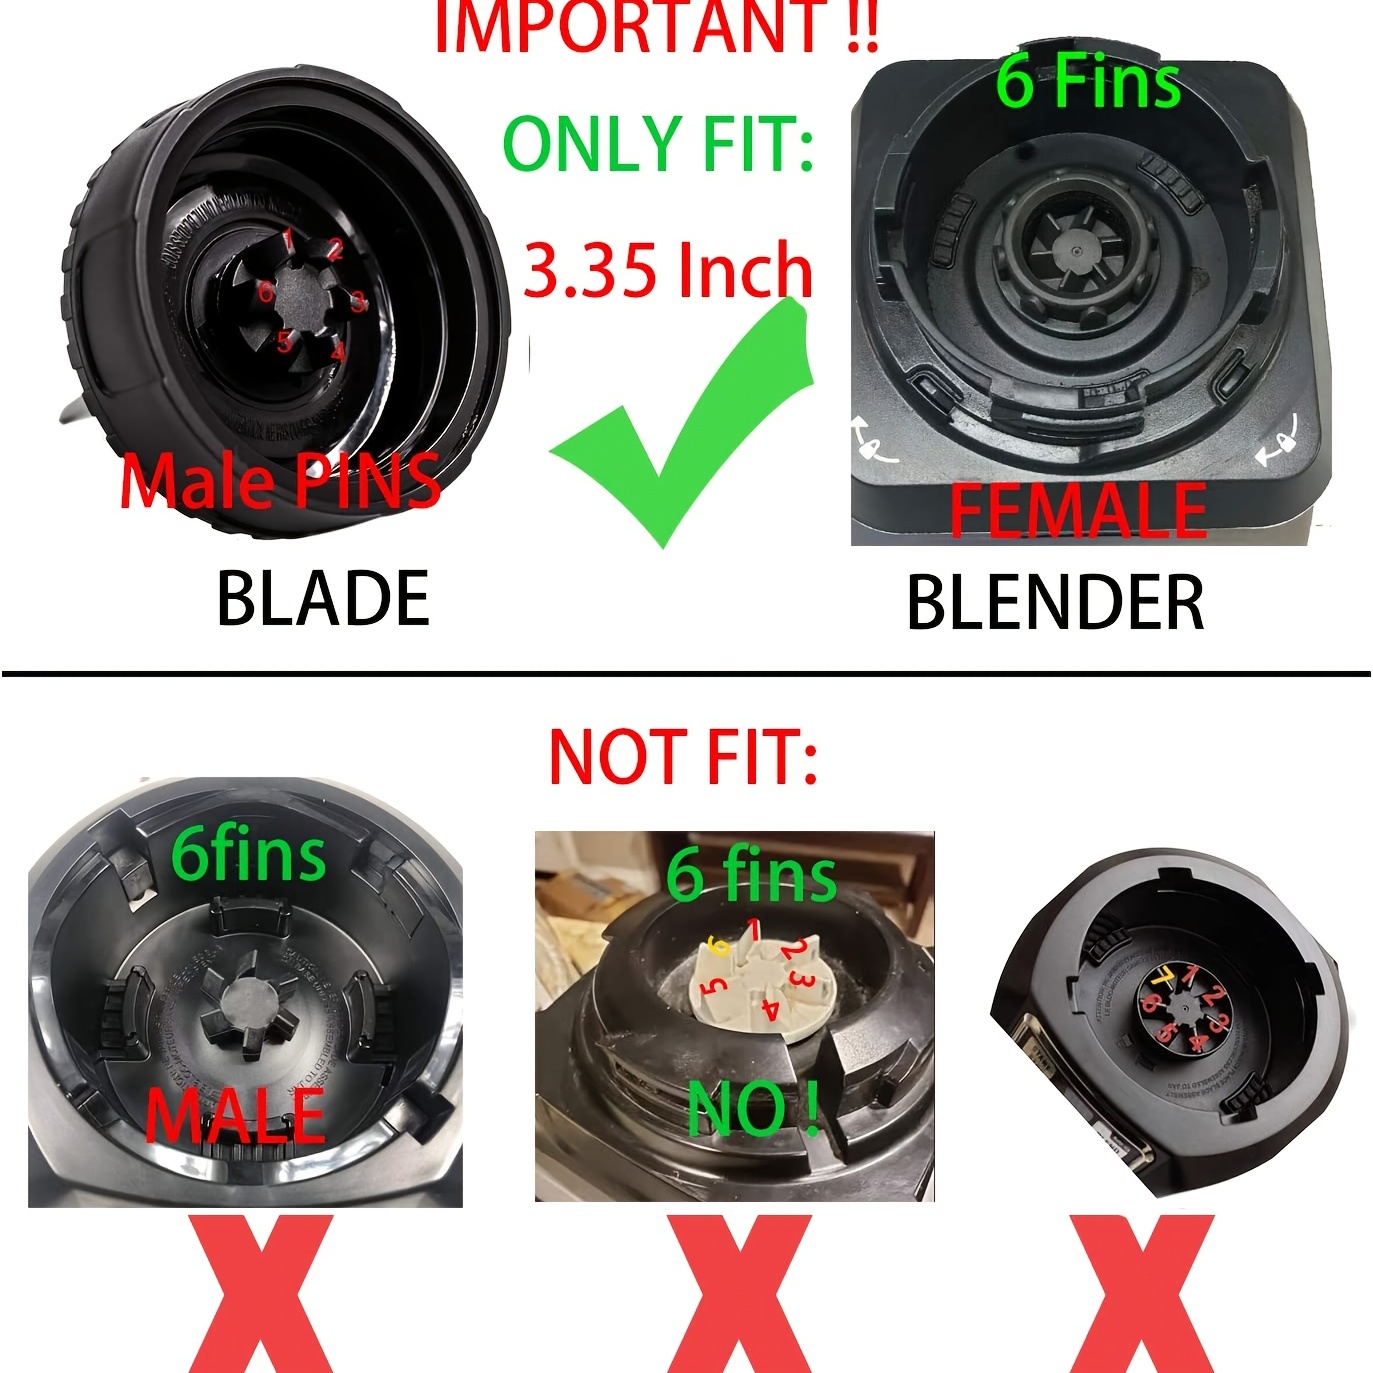 Blender Replacement Parts for for Ninja Blade 16 oz Cup, Blender Blade Fit  for Nutri Ninja BL660 1100W, Ninja BL771 30, Ninja BL770 1500W, BL780CO